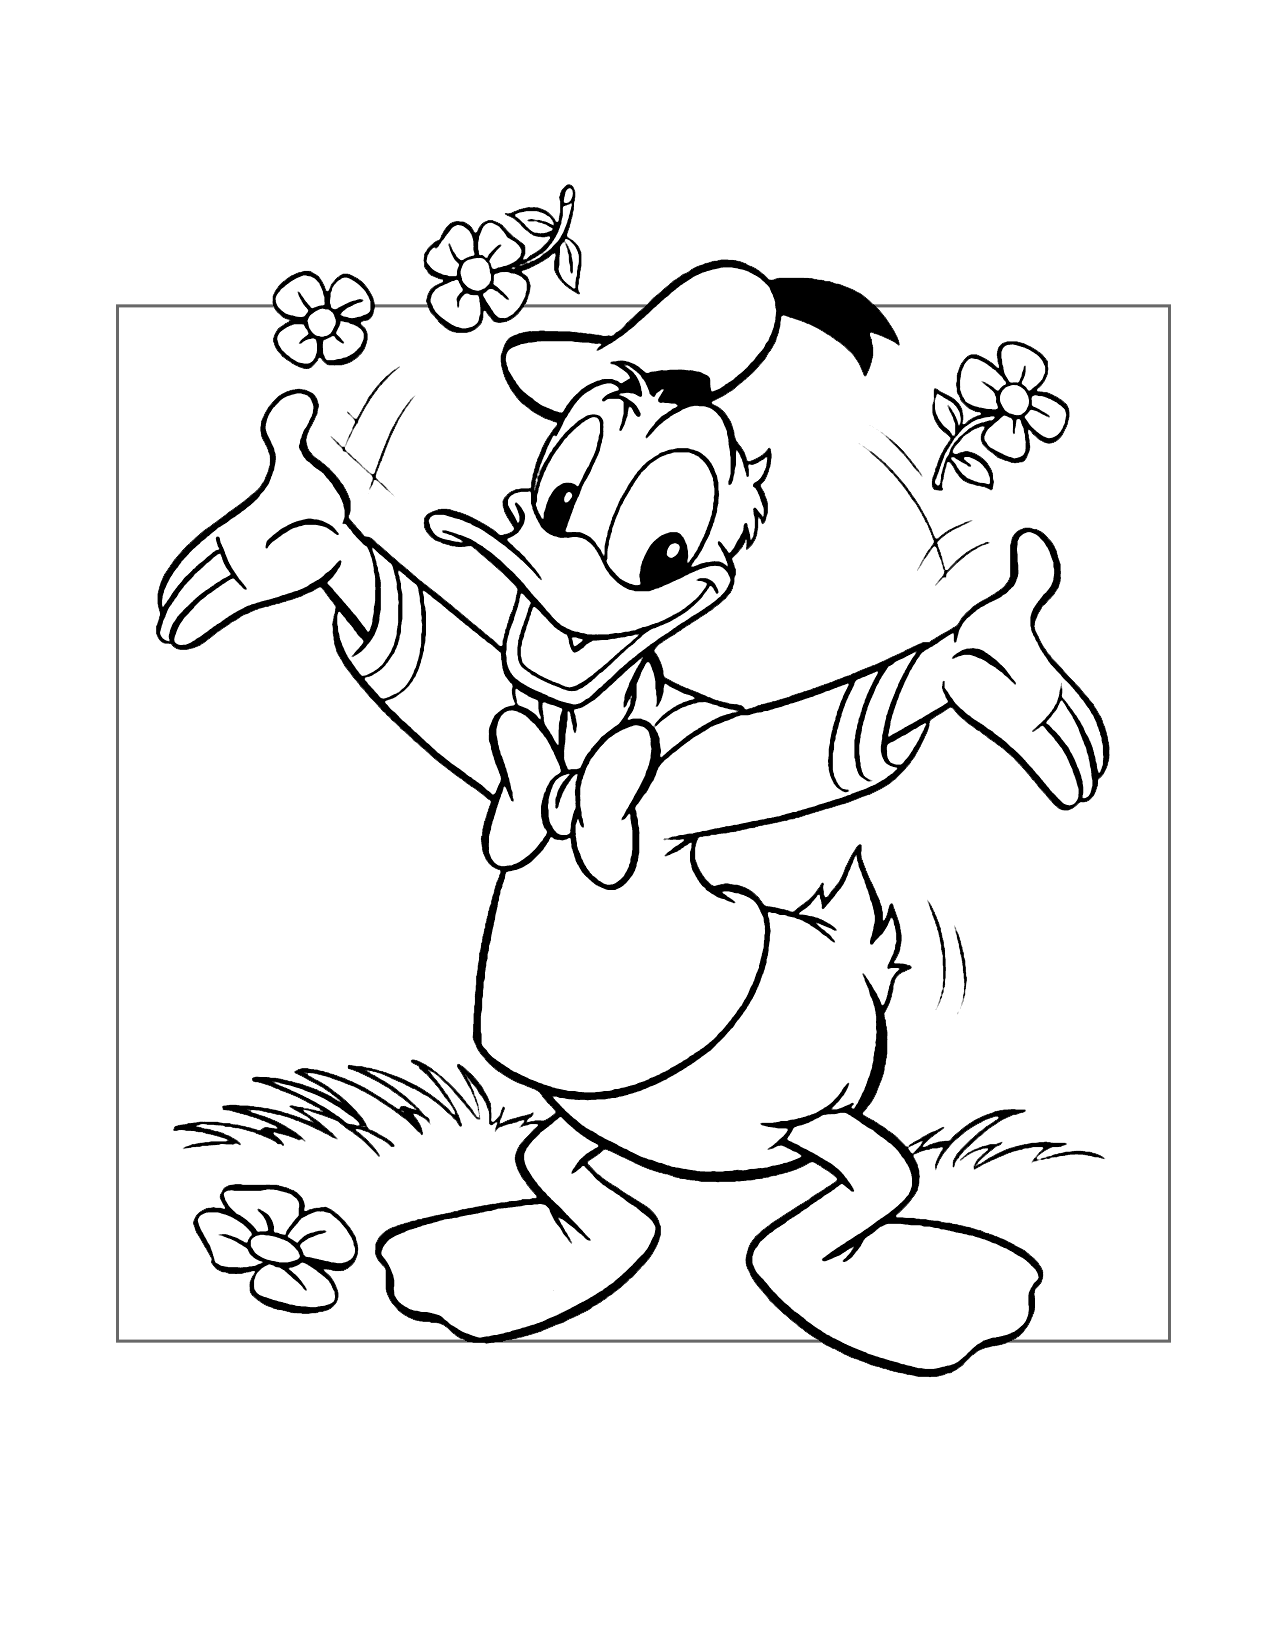 Donald Duck Is Happy Coloring Page